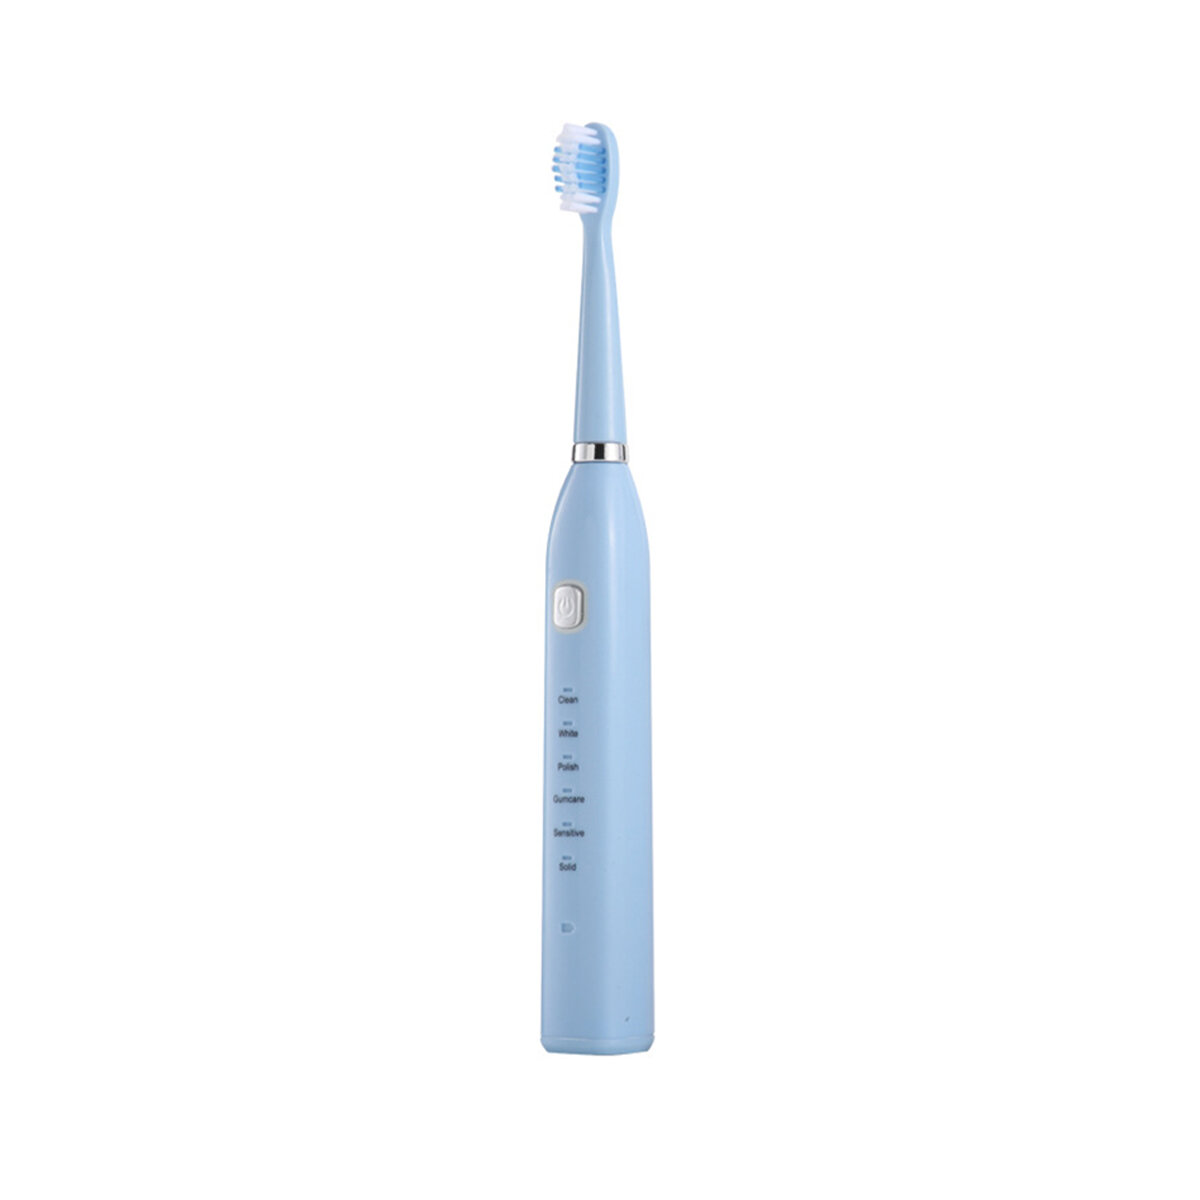 

IPX7 Waterproof 500mAh Electric Toothbrush 6 Speed USB Rechargble Sonic Vibration Tooth Brush Whitening Oral Care With 3